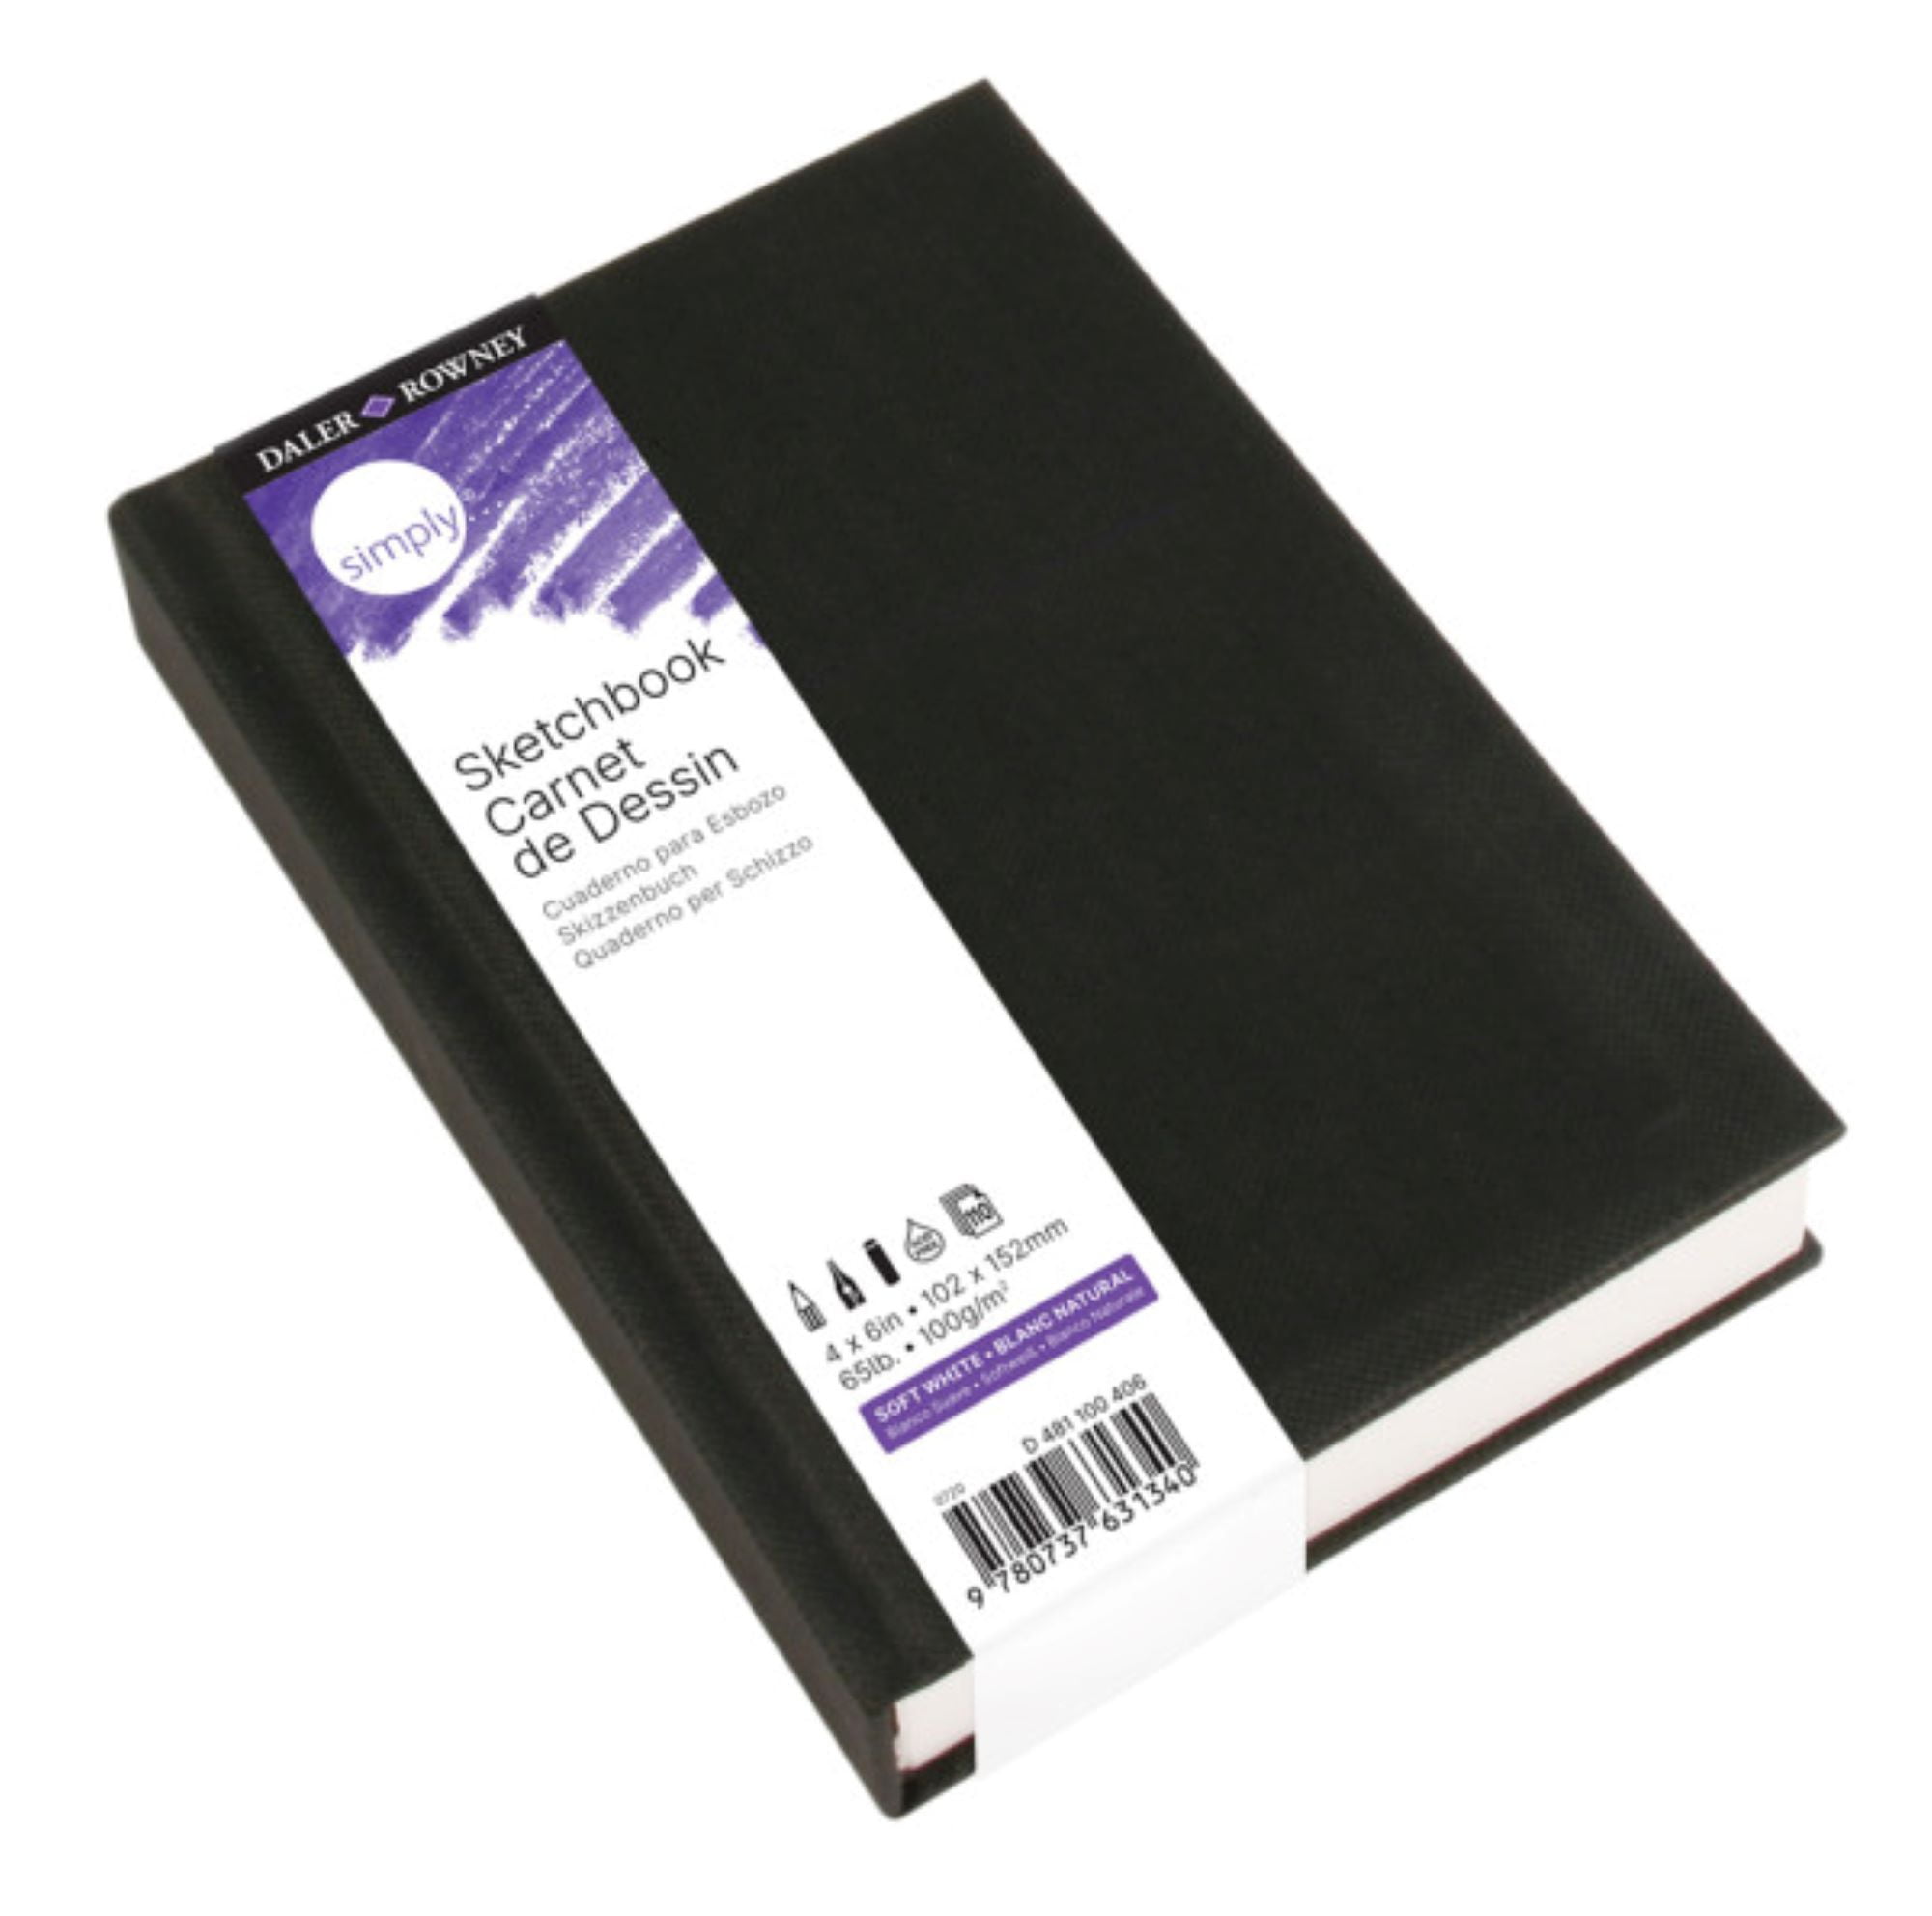 Daler-Rowney Simply Sketchbook, Black Cover, Sketch Paper, 4 x 6, 110  Sheets for Students & Artists